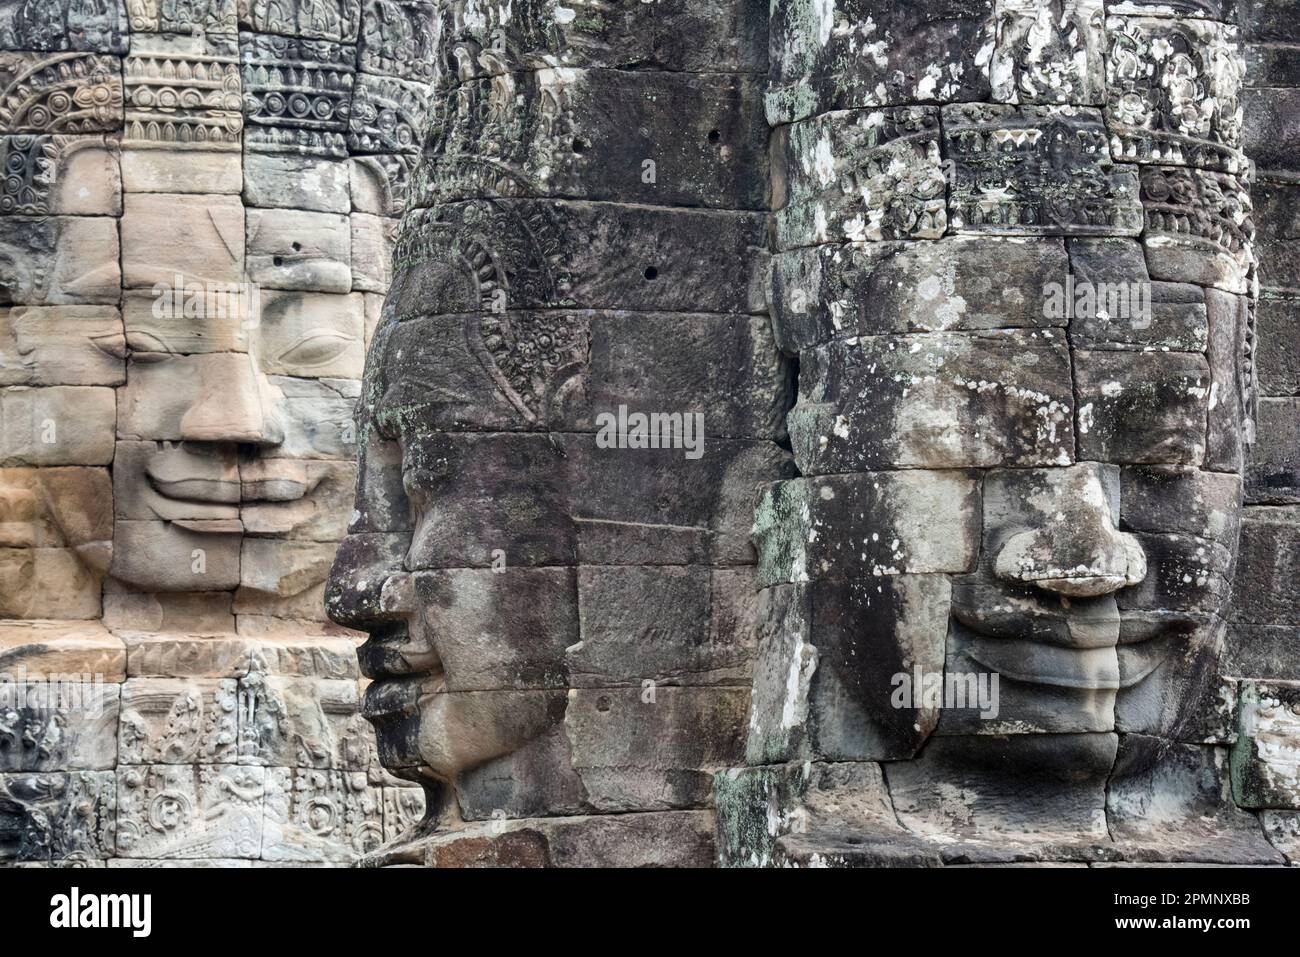 Stone faces on the towers of Angkor Thom; Siem Reap, Angkor, Cambodia Stock Photo